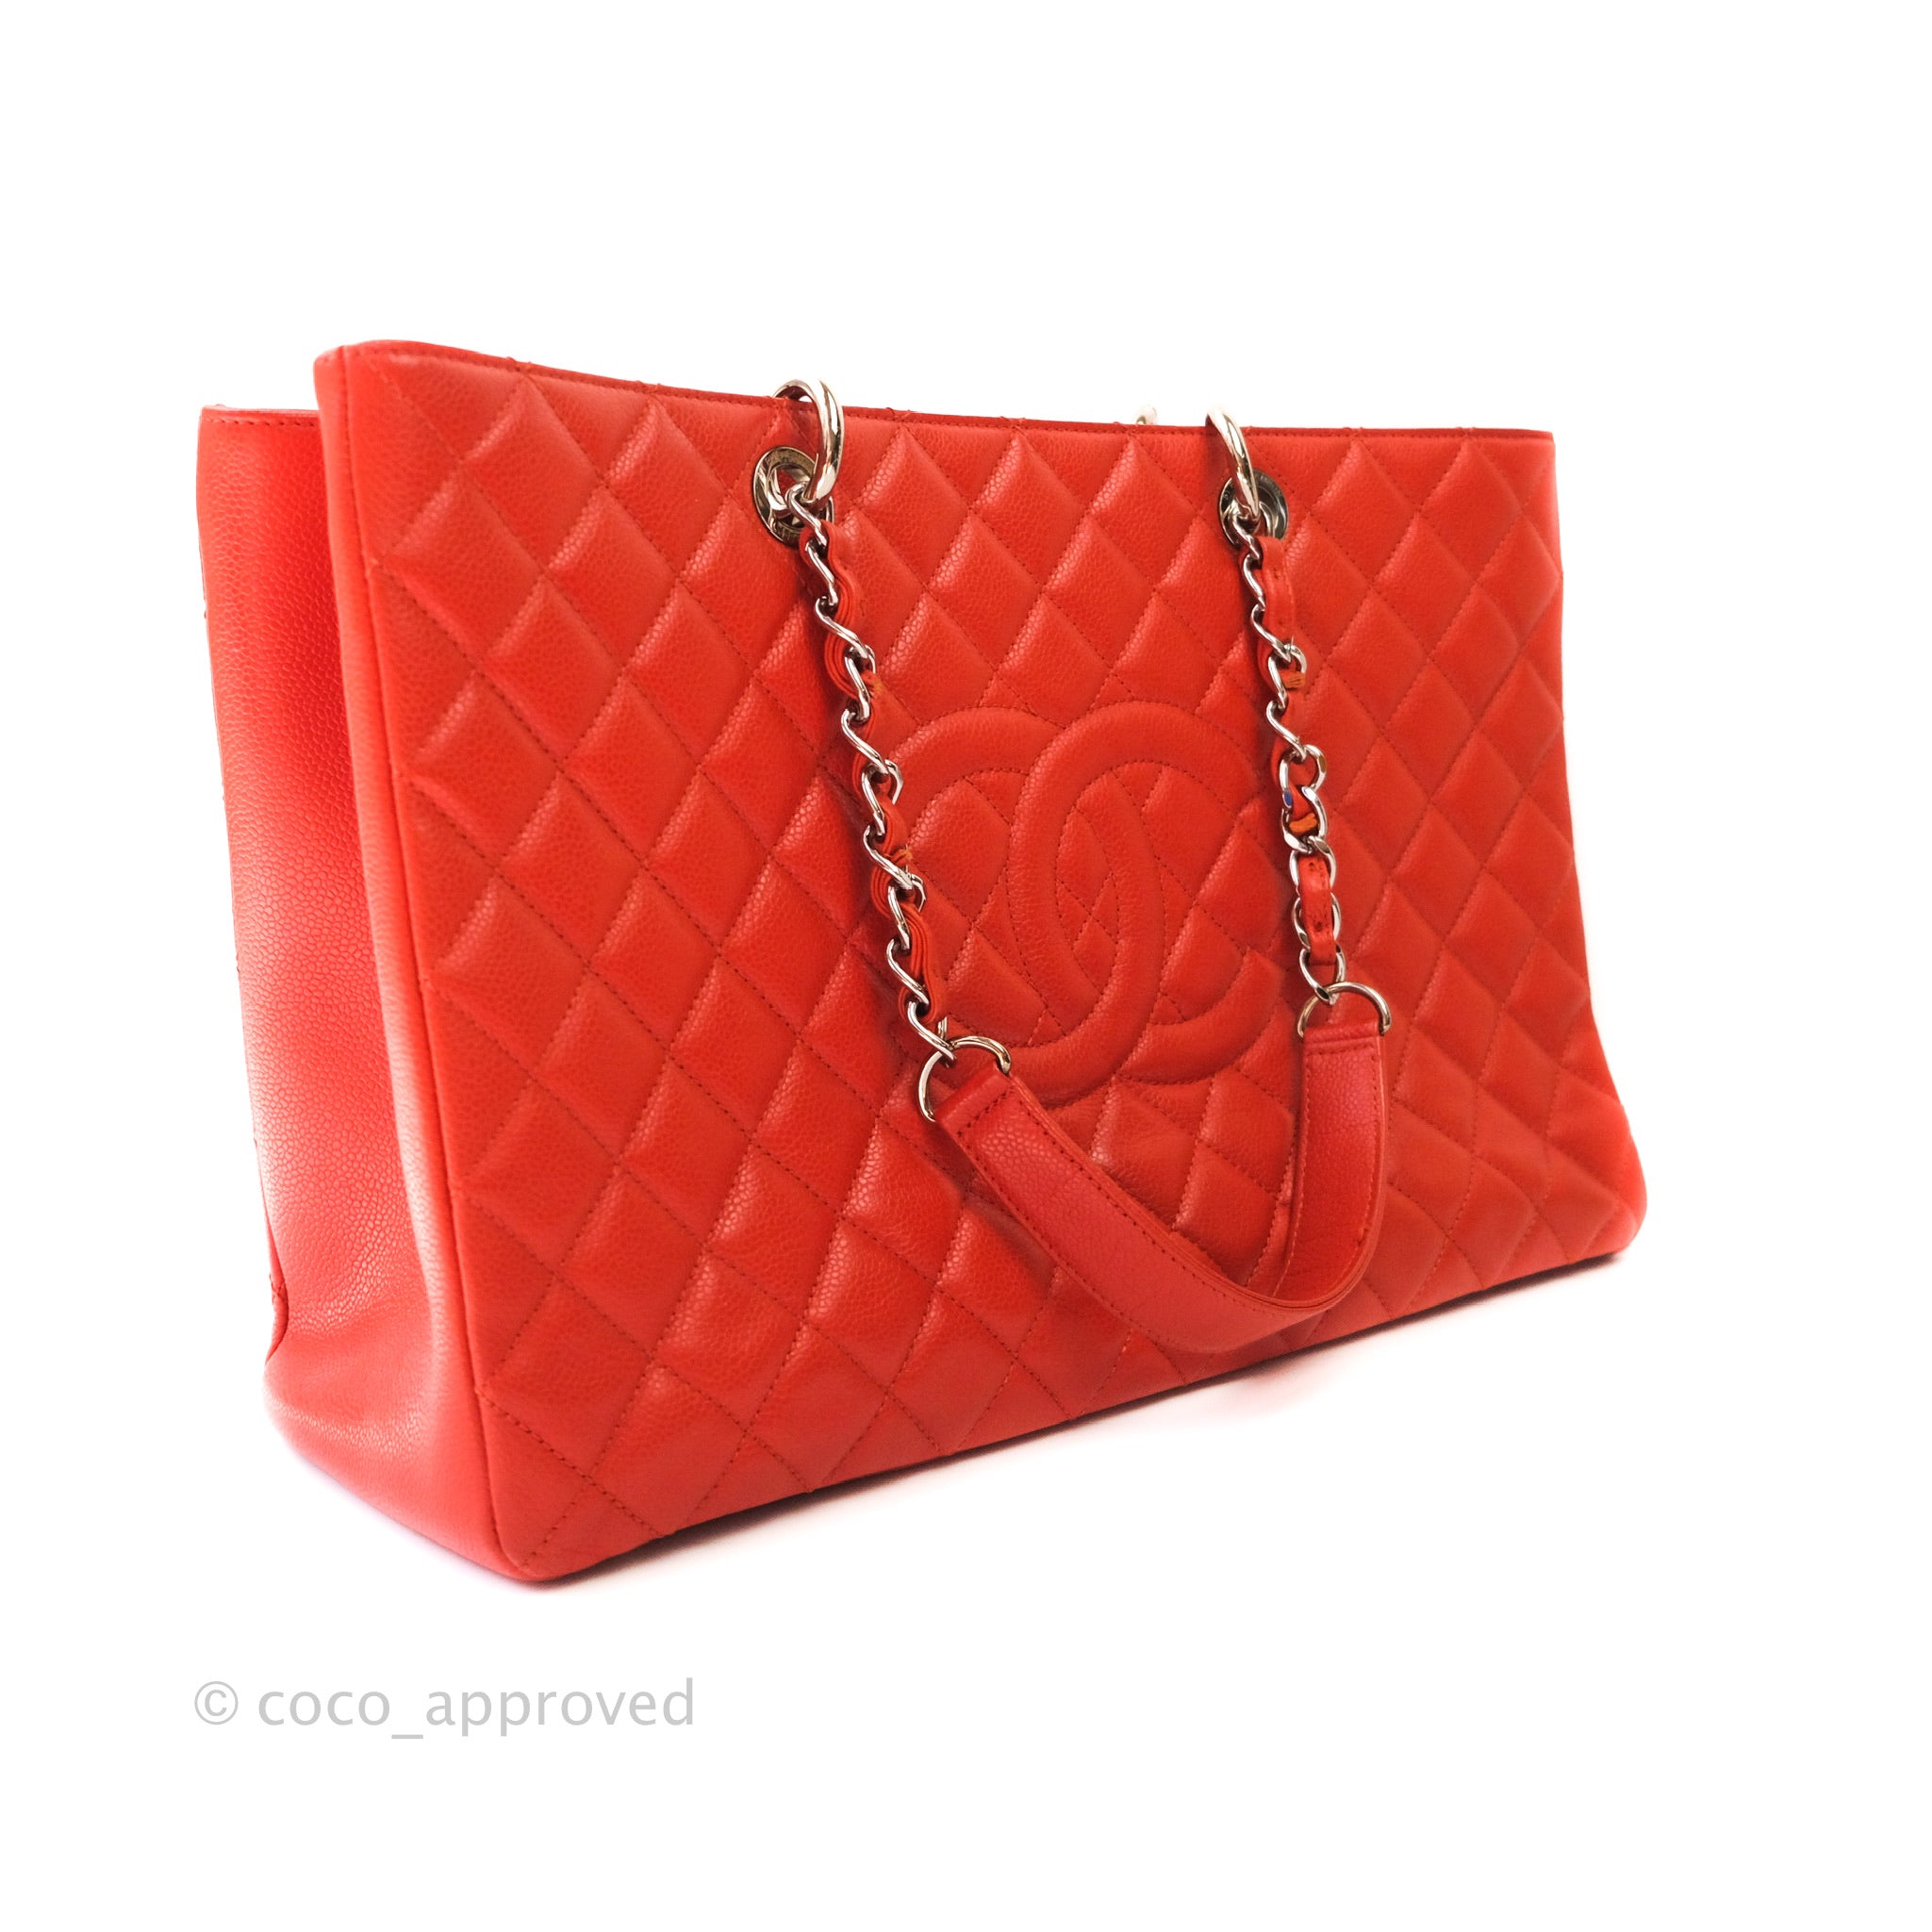 Chanel - Authenticated Grand Shopping Handbag - Leather Red for Women, Very Good Condition